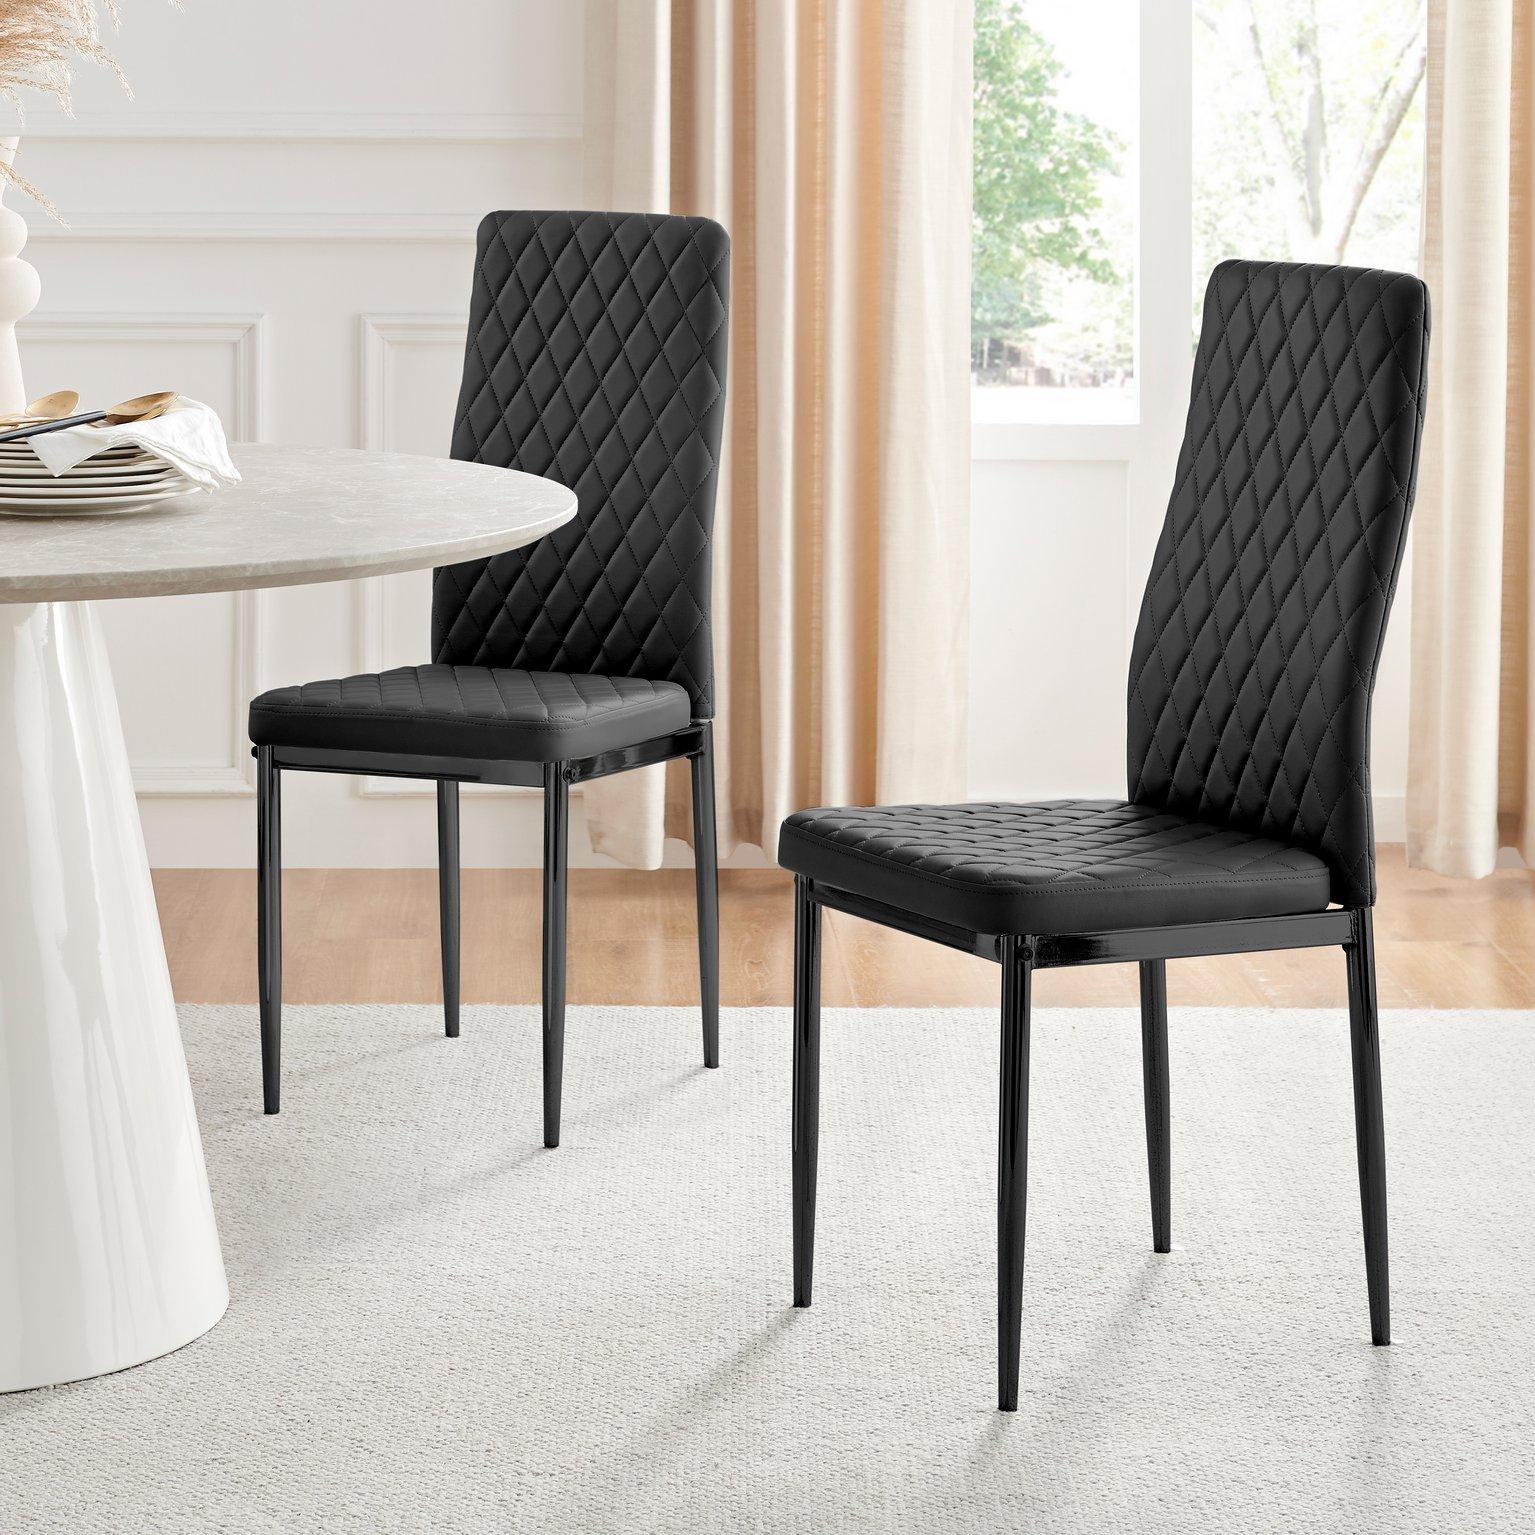 Set of 4 Milan High Back Soft Touch Diamond Pattern Faux Leather Dining Chairs With Black Powder Coa